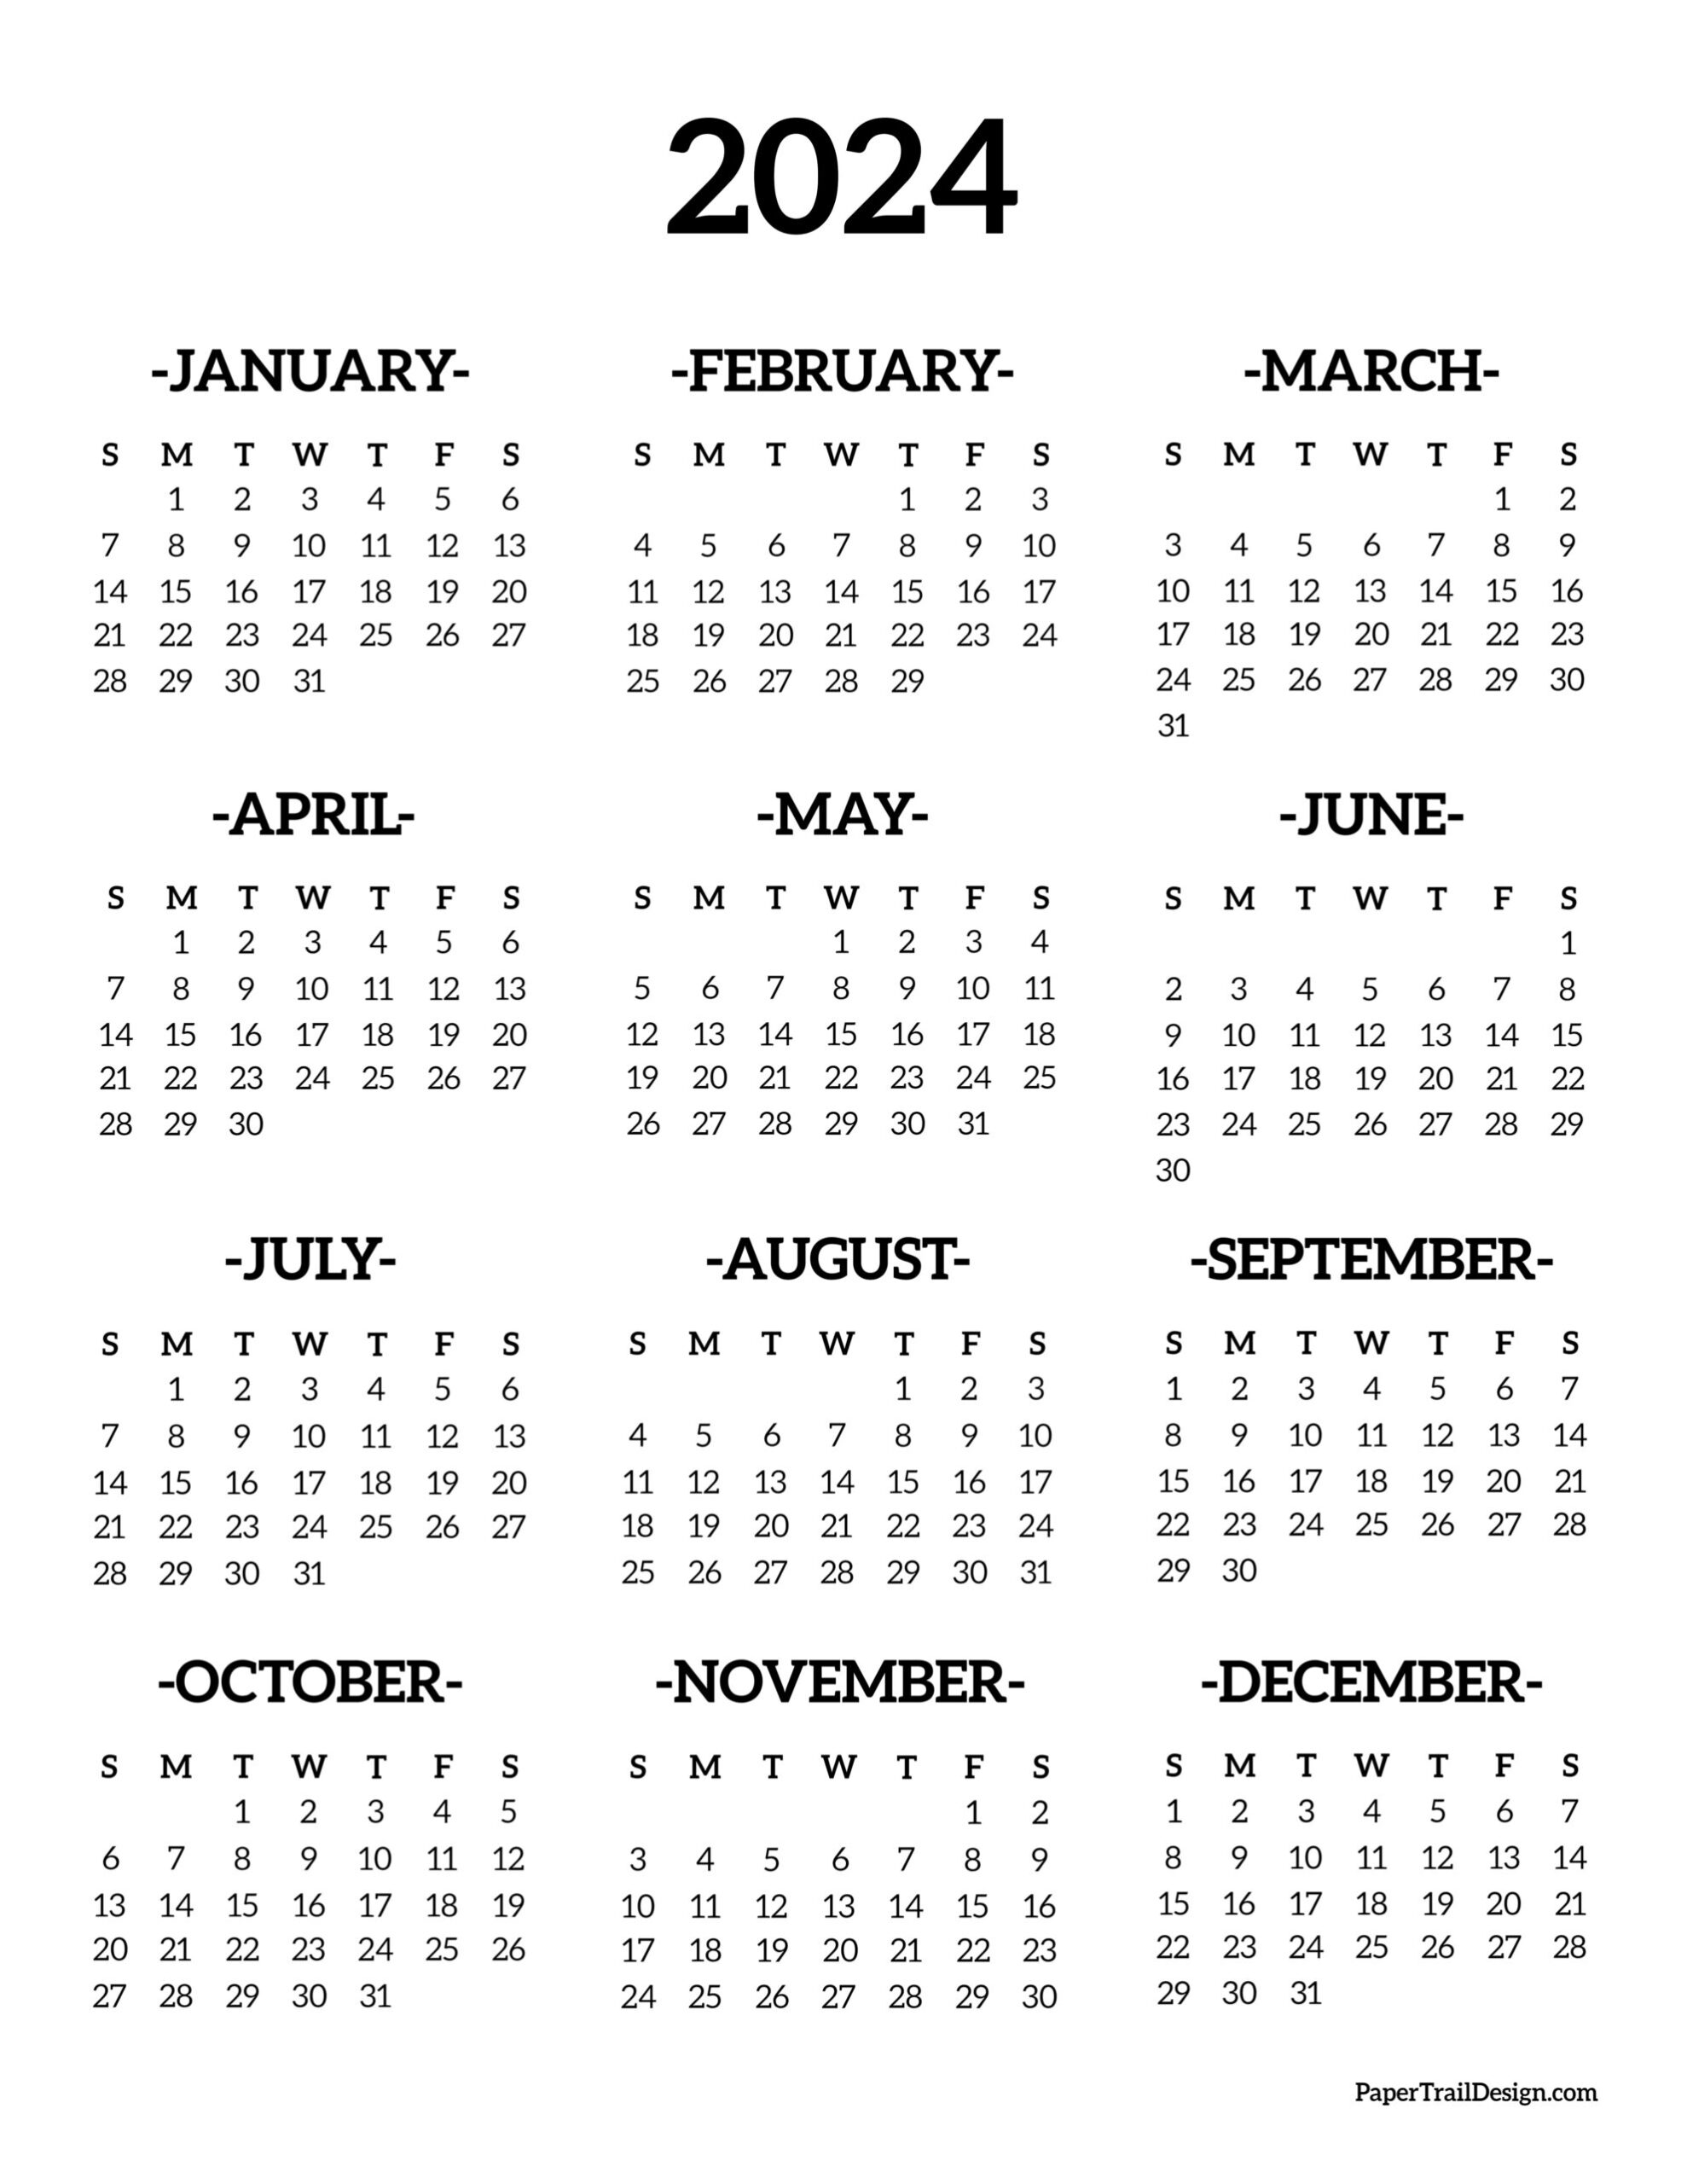 Calendar 2024 Printable One Page - Paper Trail Design for Printable Year Calendar 2024